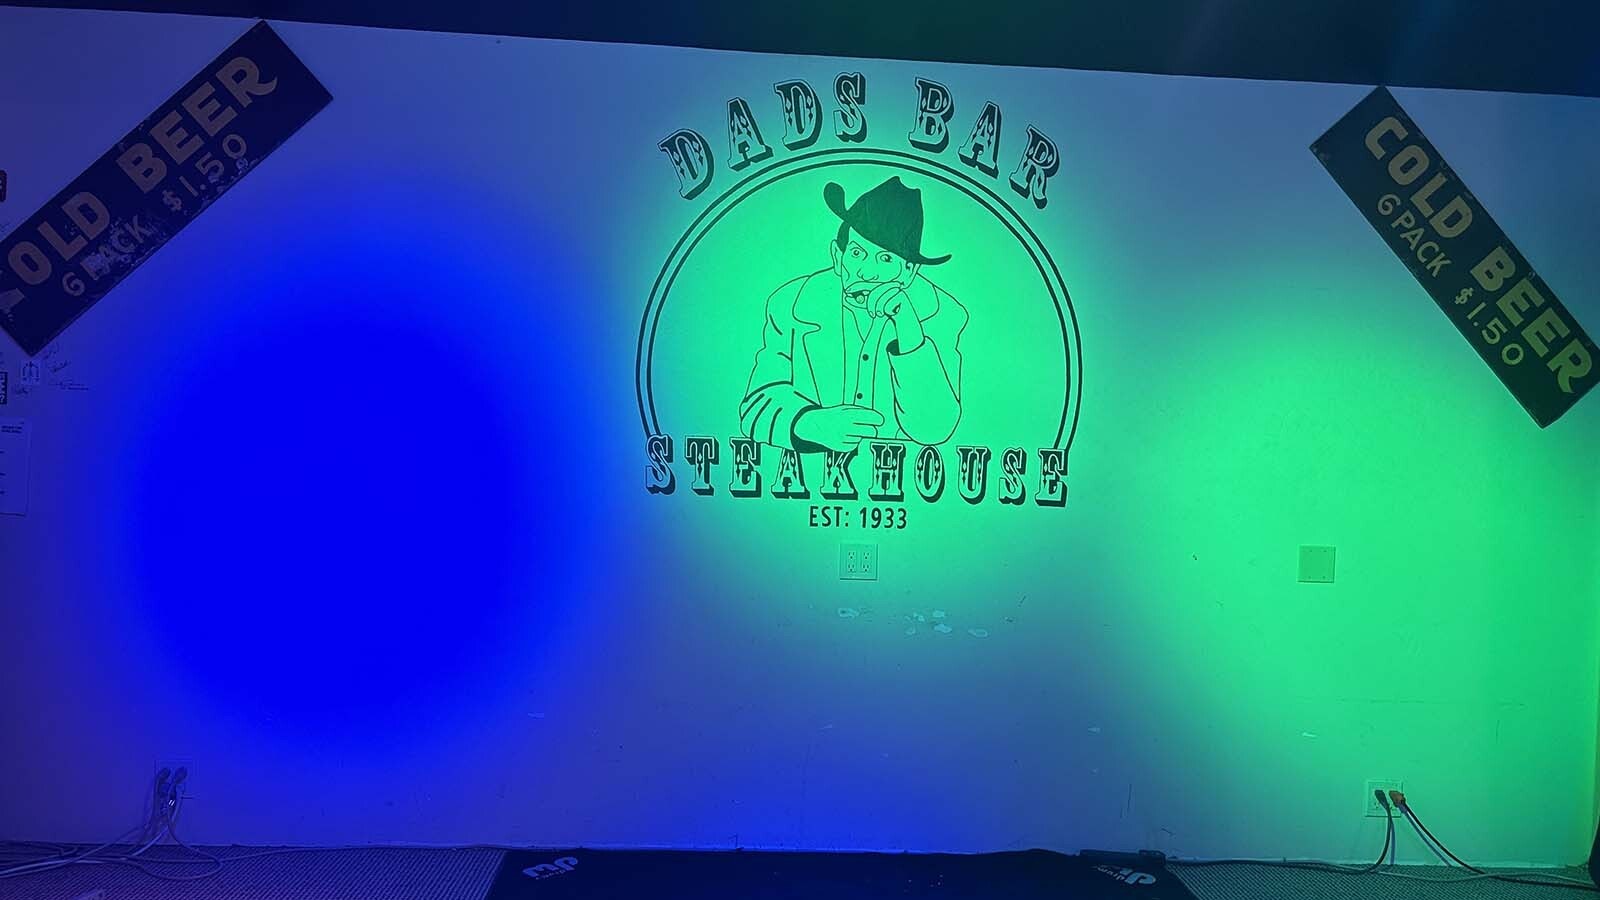 The Dad’s Bar logo is a line drawing of original owner Alf “Dad” Walton. Current owner Terry Gordon said Dad always had a cigar, but never lit it.